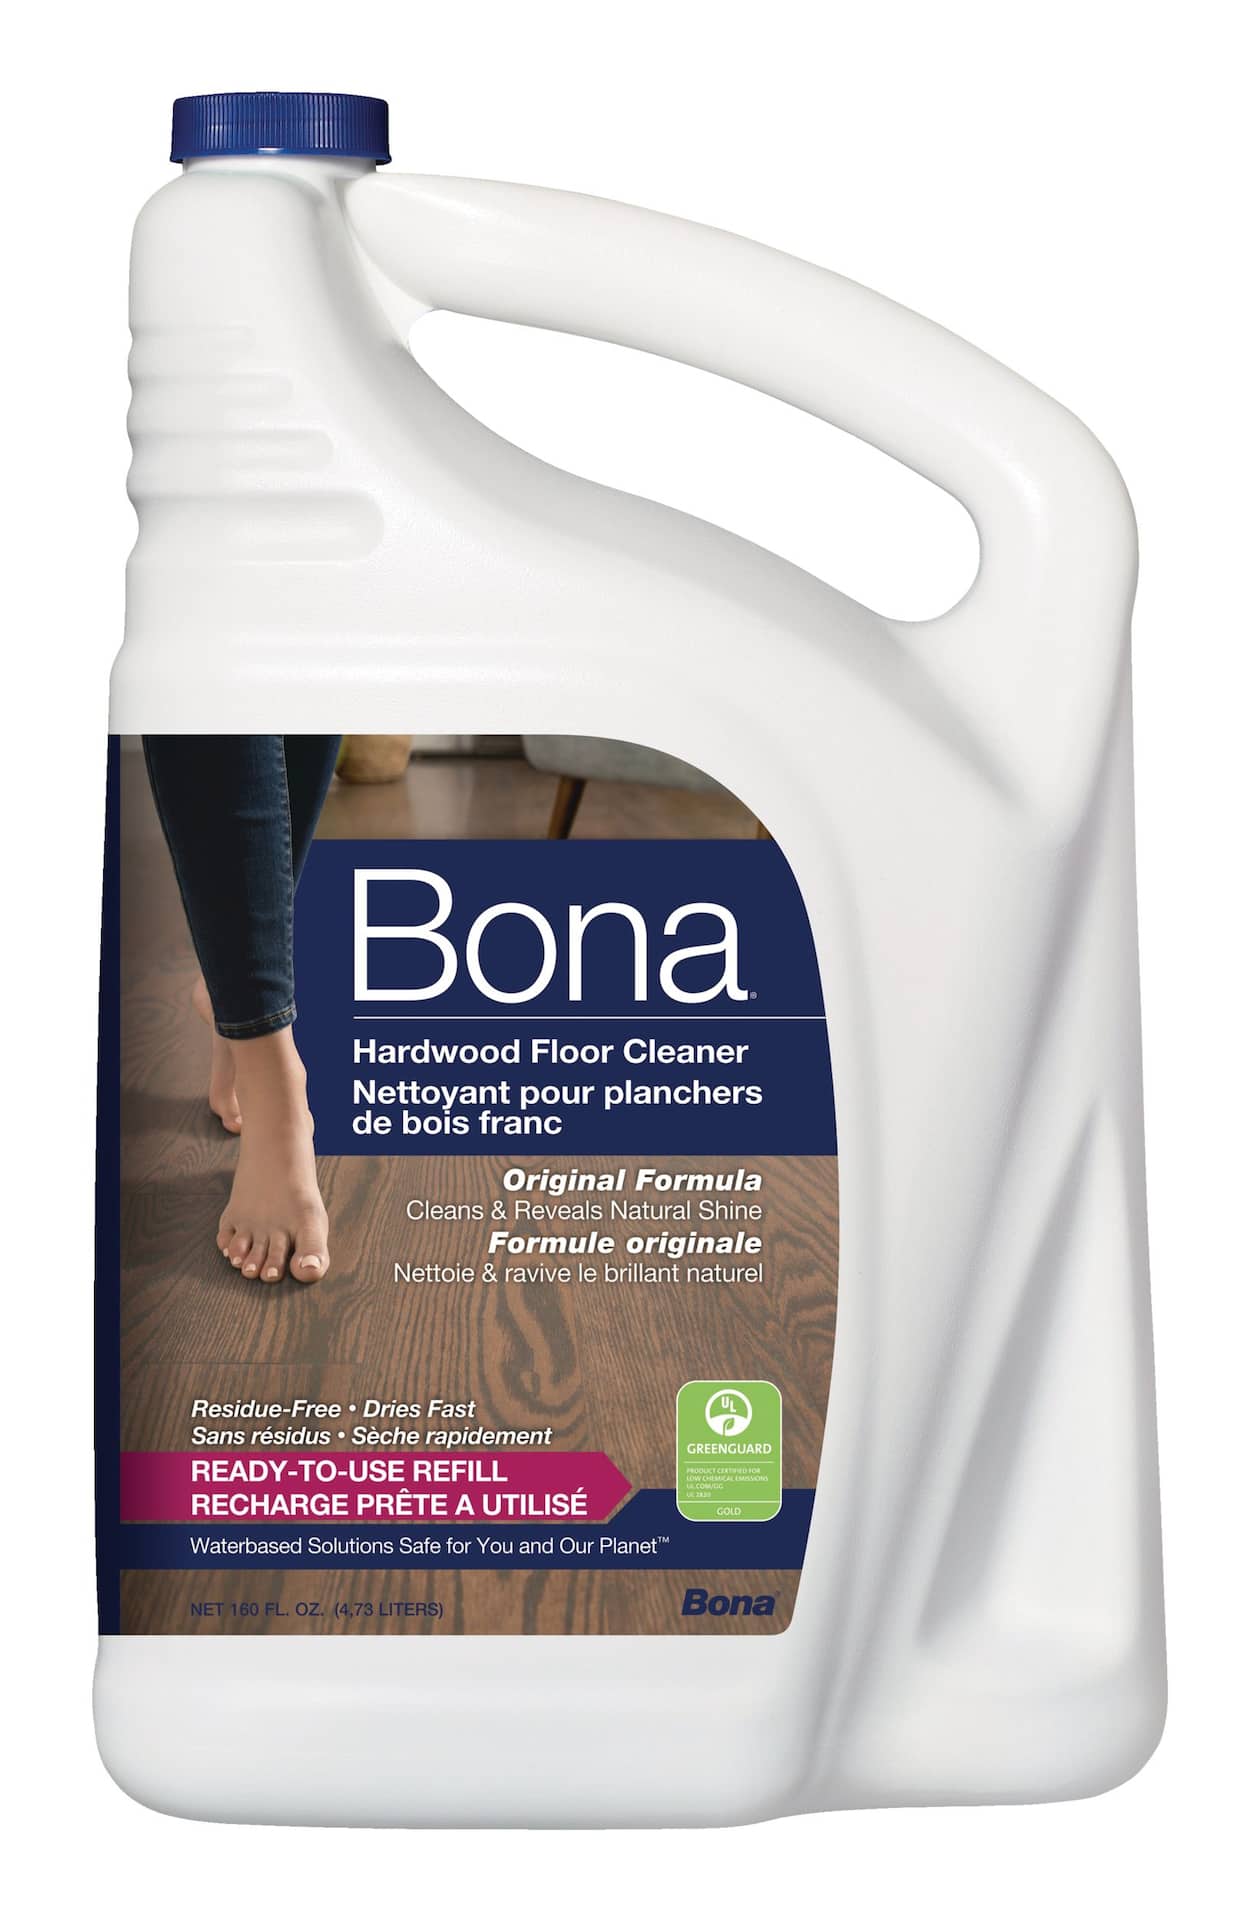 https://media-www.canadiantire.ca/product/living/cleaning/household-cleaning-solutions/1530664/bona-hardwood-floor-cleaner-refill-4-73l-b6a4746a-34e1-4fbb-9bf7-08ae1f7704de-jpgrendition.jpg